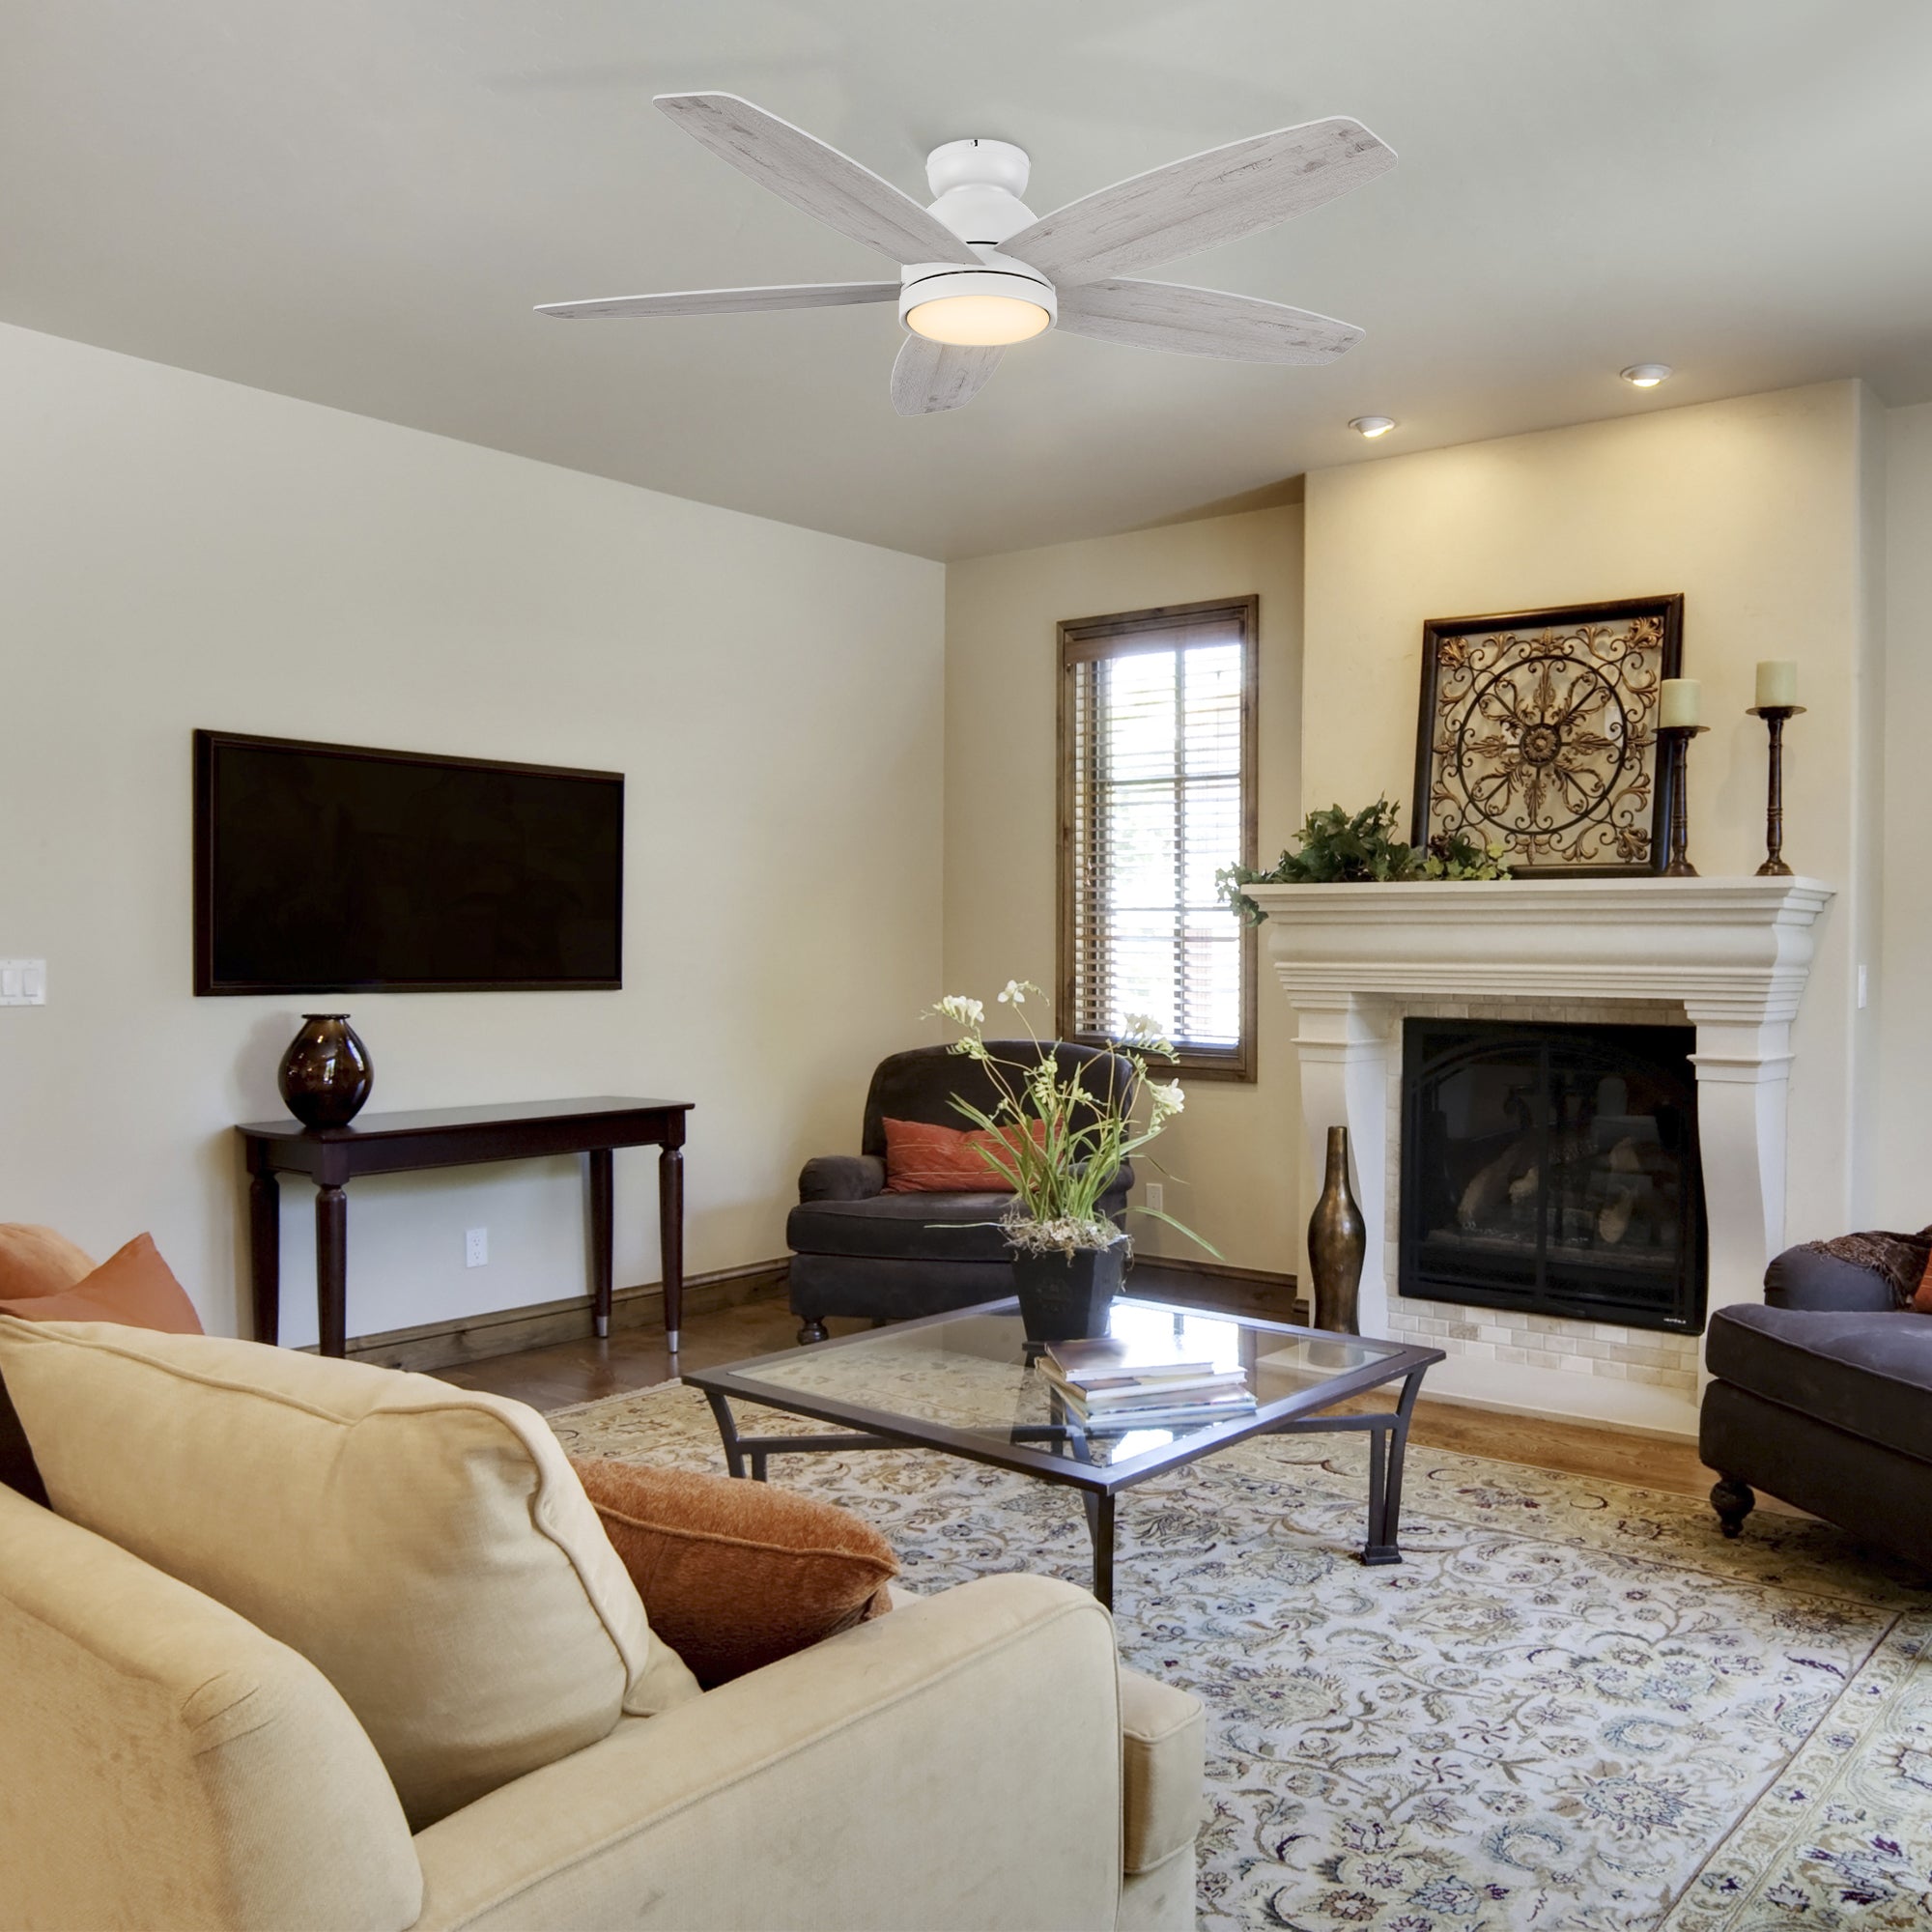 The Rickon 52&quot; ceiling fan will keep your living space cool, bright, and stylish. This soft modern masterpiece is perfect for indoor living spaces. 